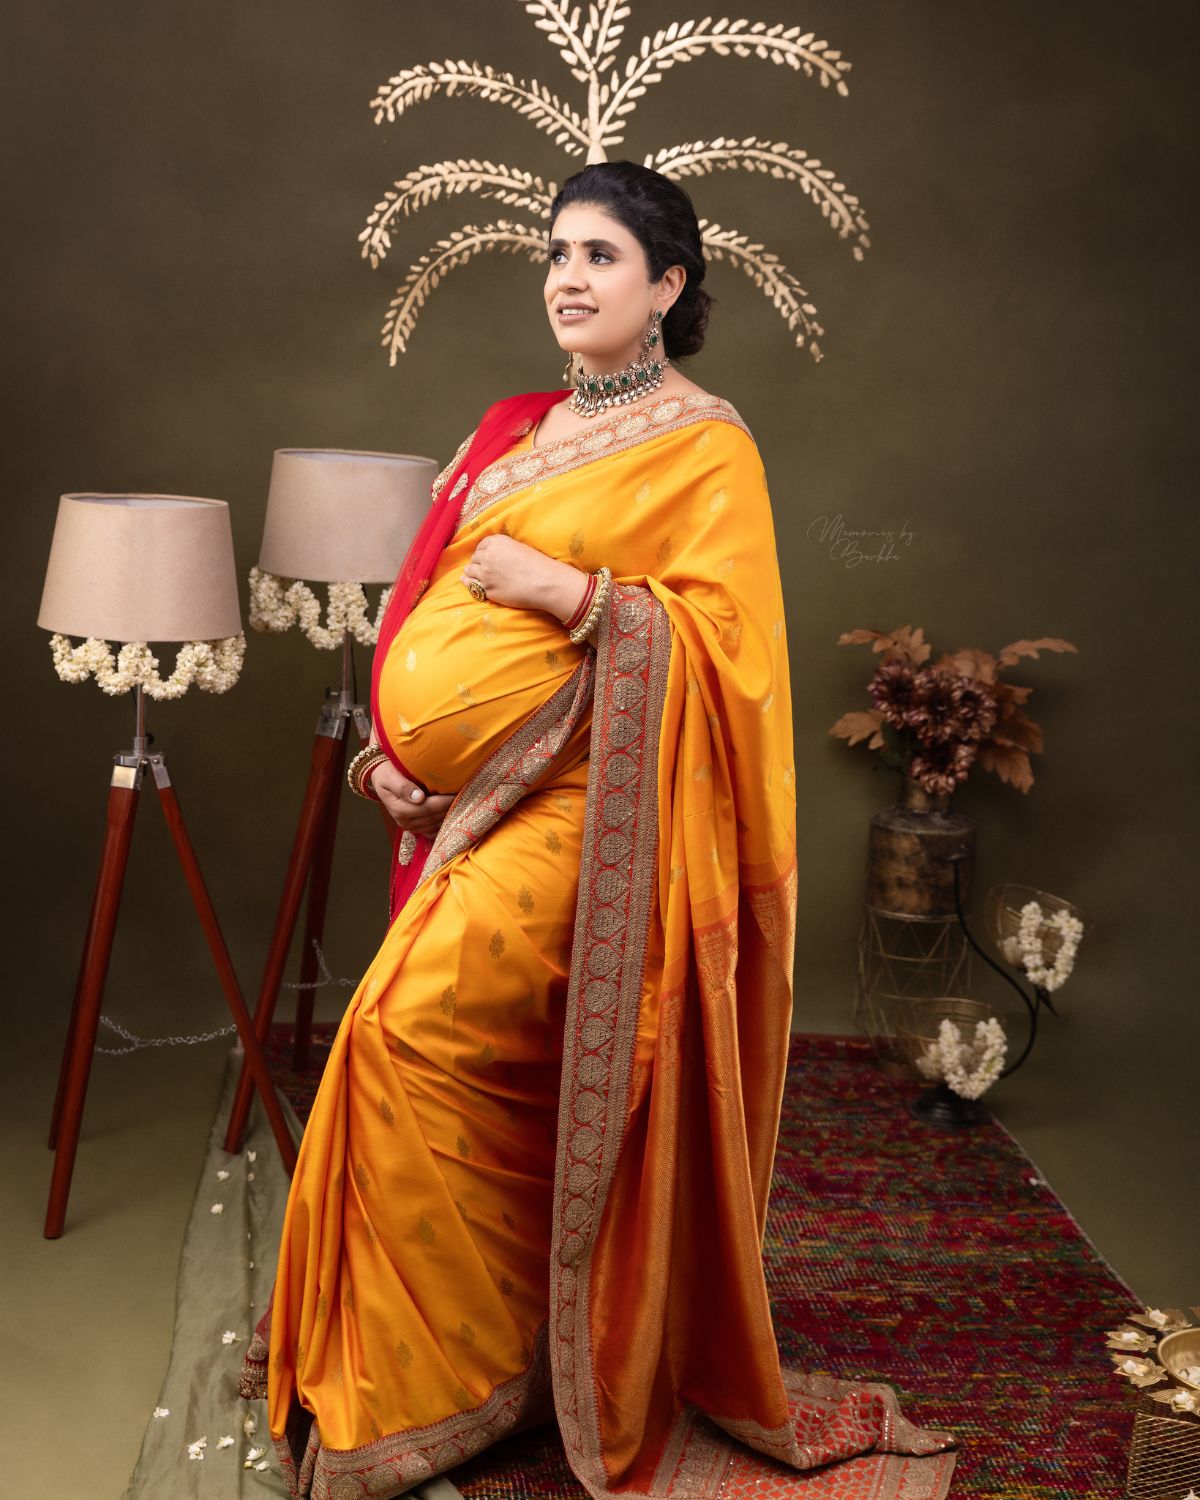 Memories By Barkha Crafting Timeless Maternity Portraits